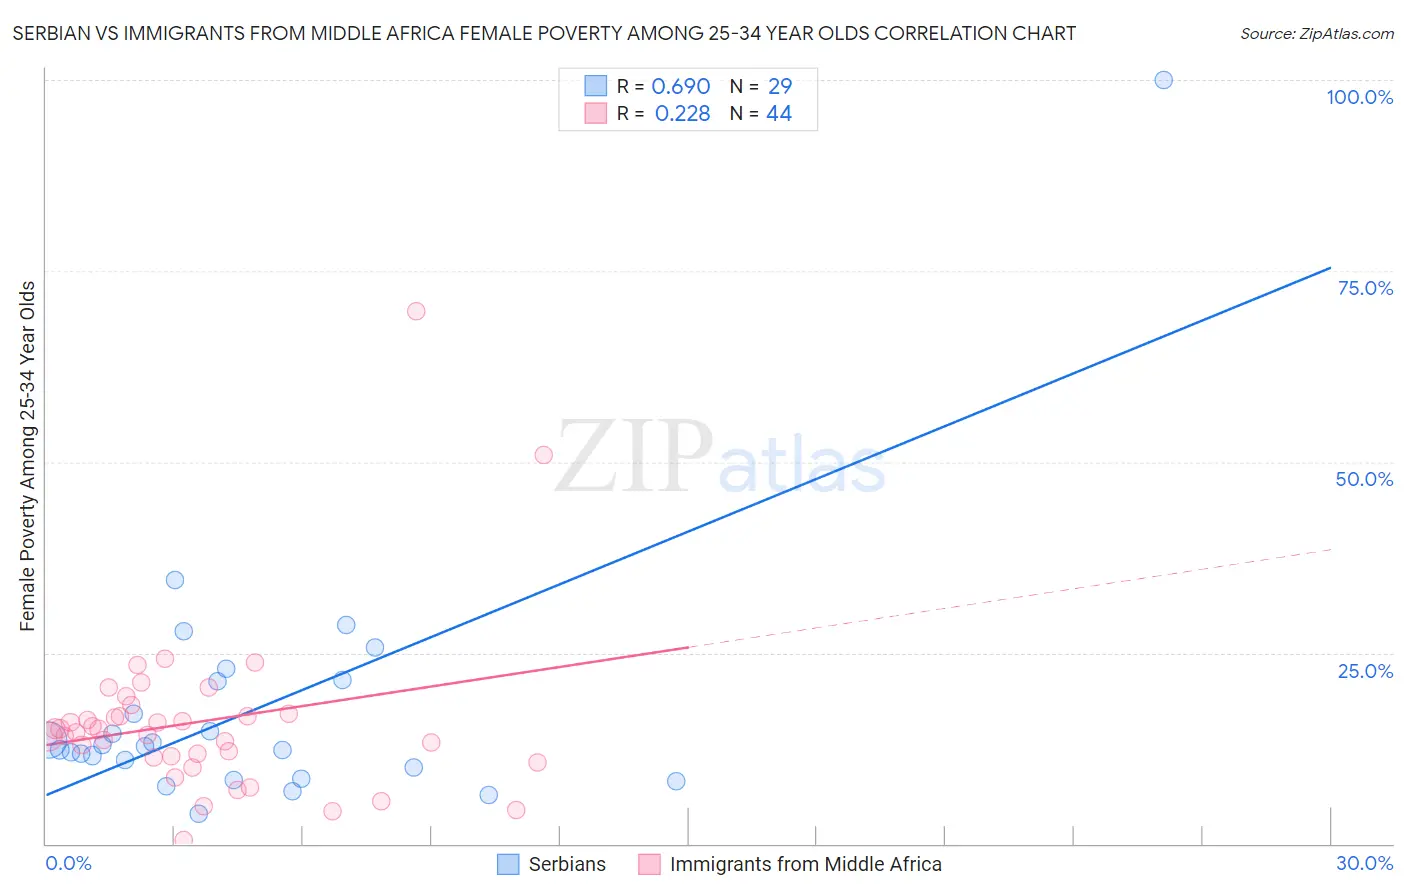 Serbian vs Immigrants from Middle Africa Female Poverty Among 25-34 Year Olds